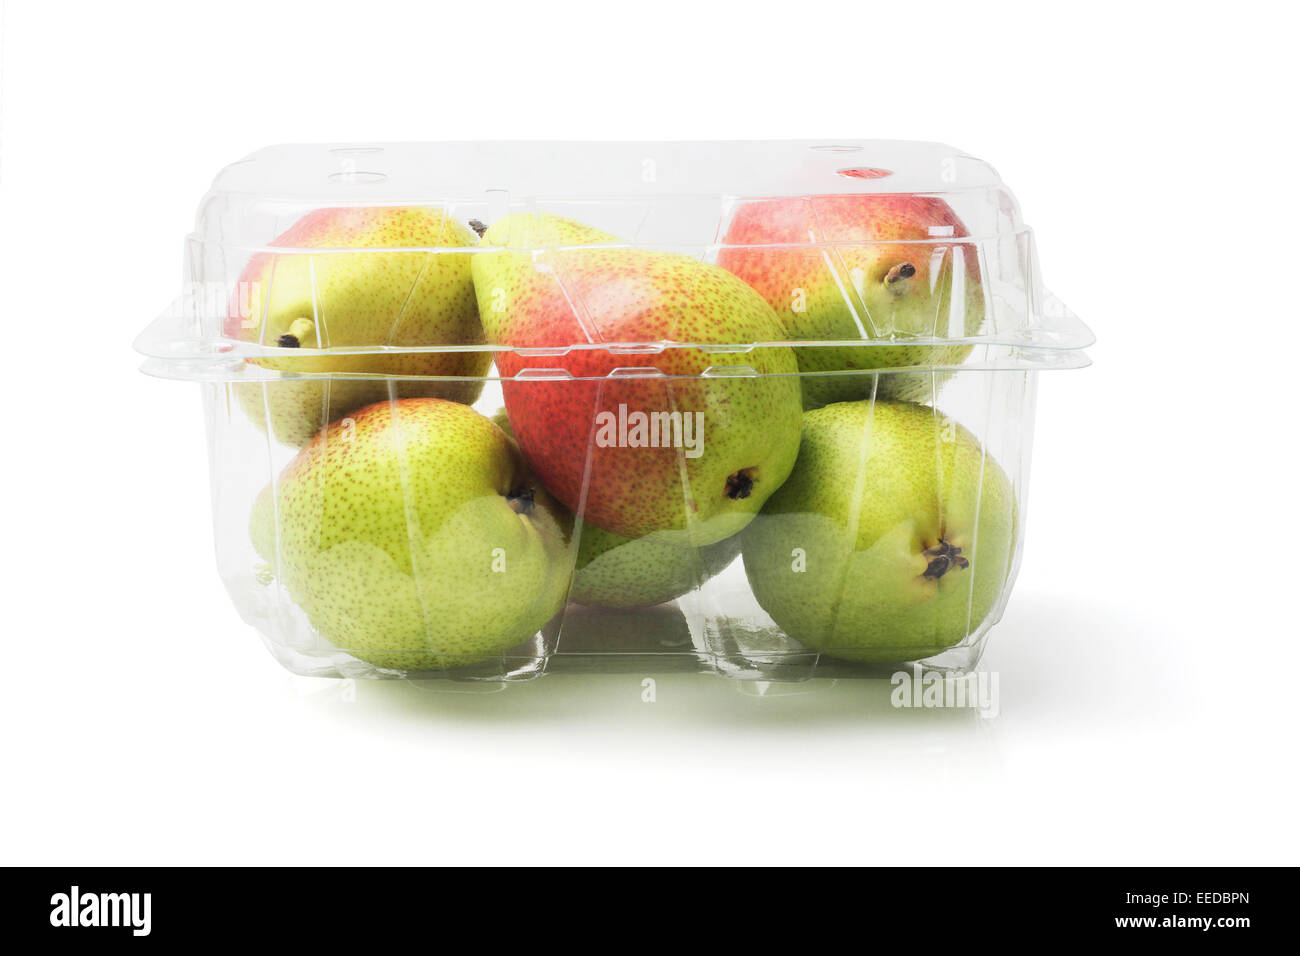 Fresh Blush Pears In Plastic Container On White Background Stock Photo